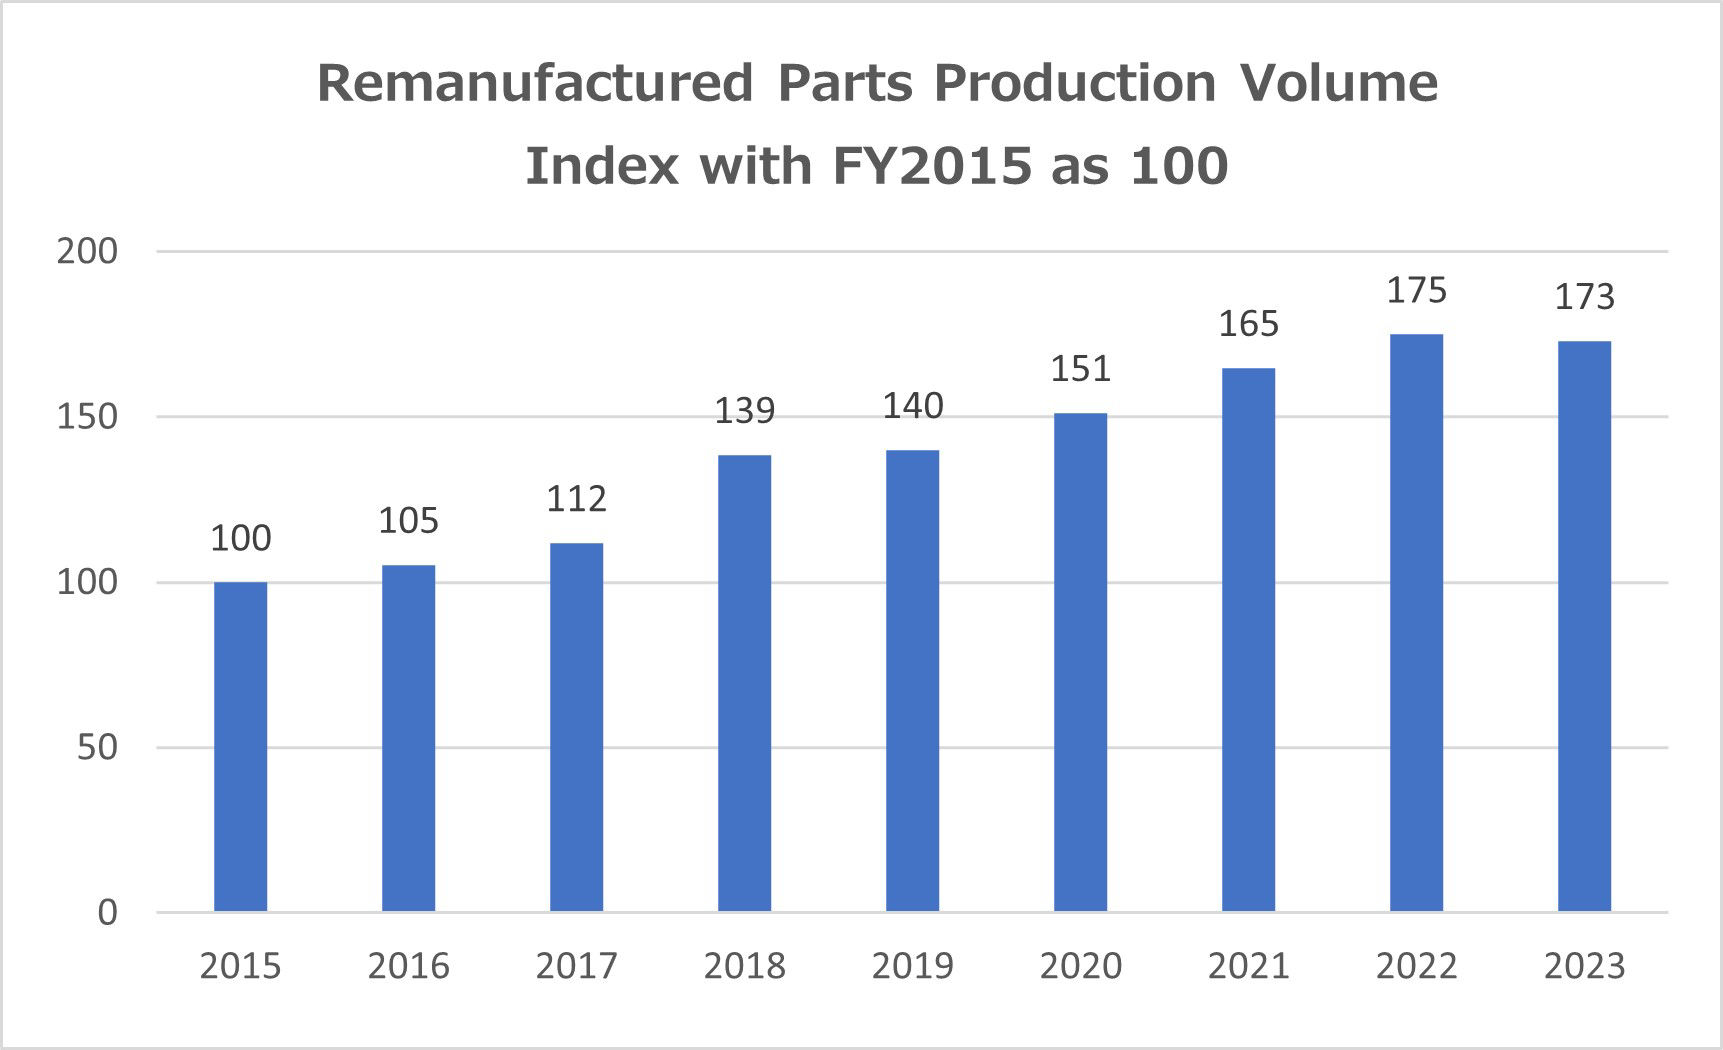 Remanufactured Parts Production Volume Index with FY2015 as 100